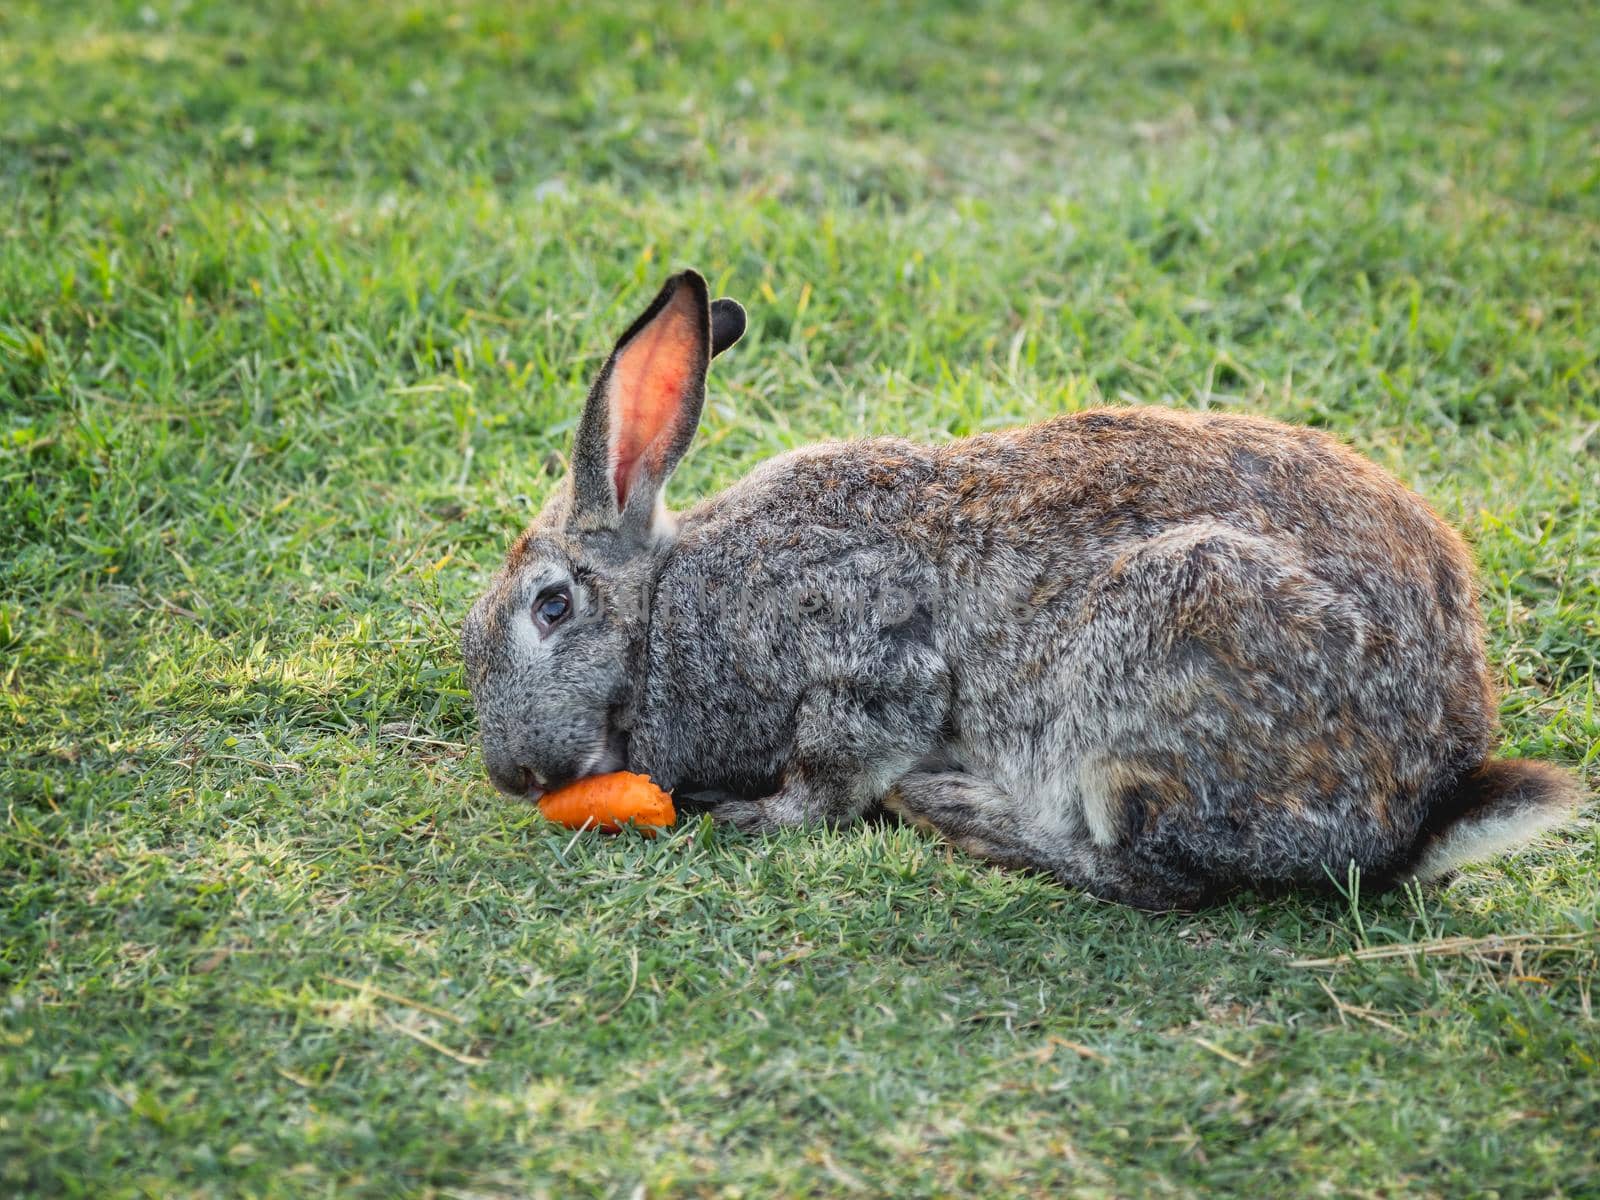 Cute bunny is chewing carrot on lawn. Fluffy rabbit with colorful vegetable on green grass is staring in camera. Farm animal is grazing on field outdoors.